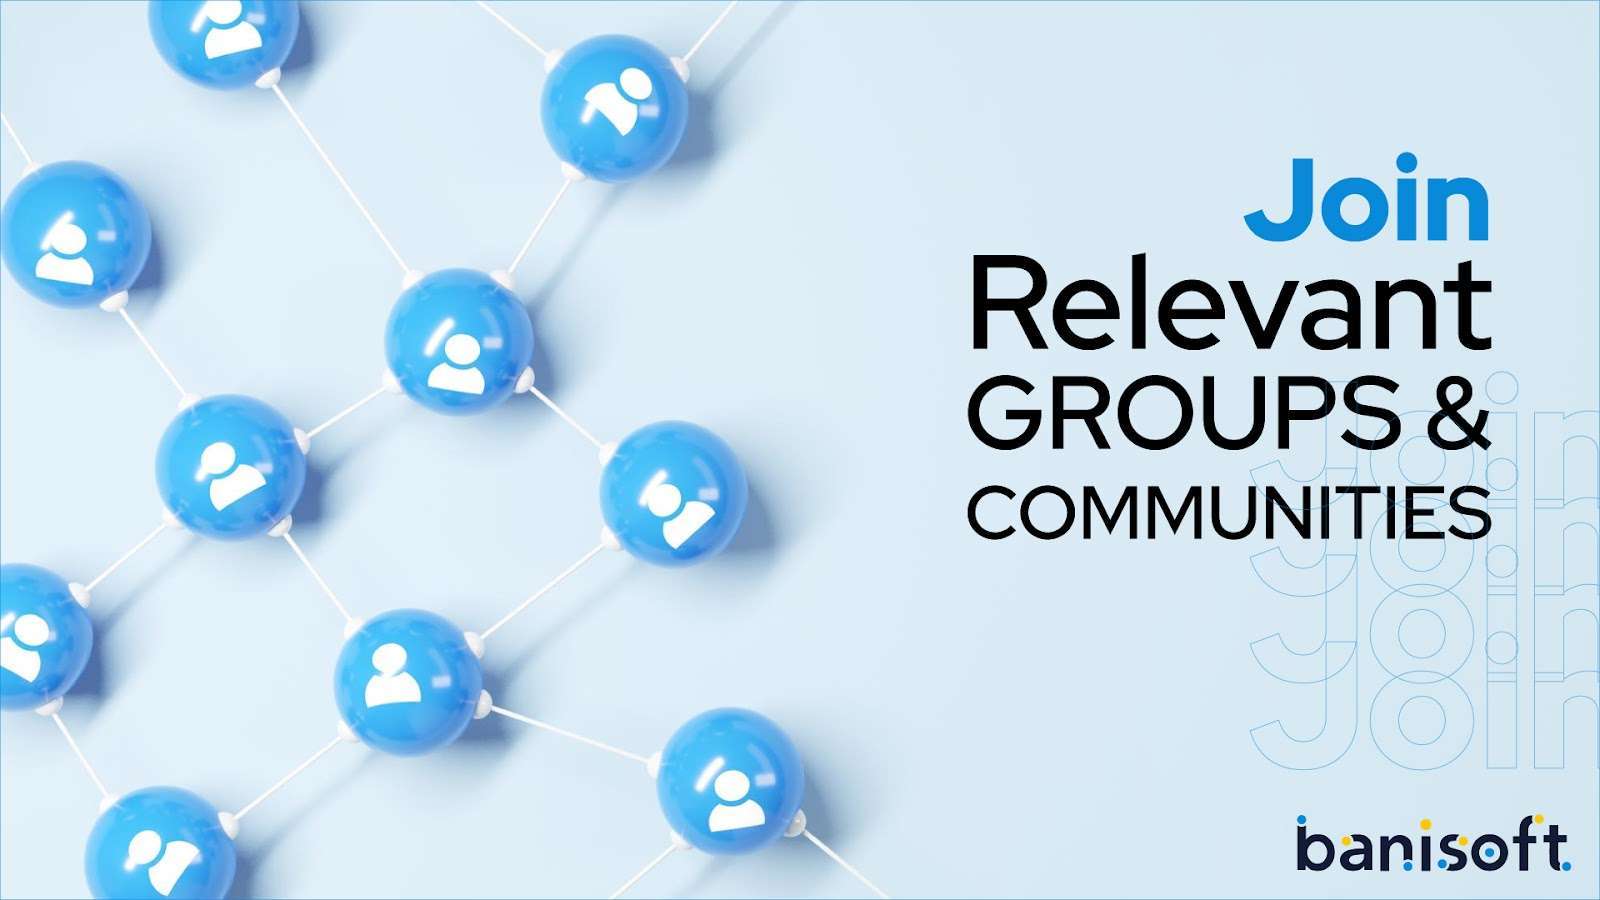 join relevant groups & communities images